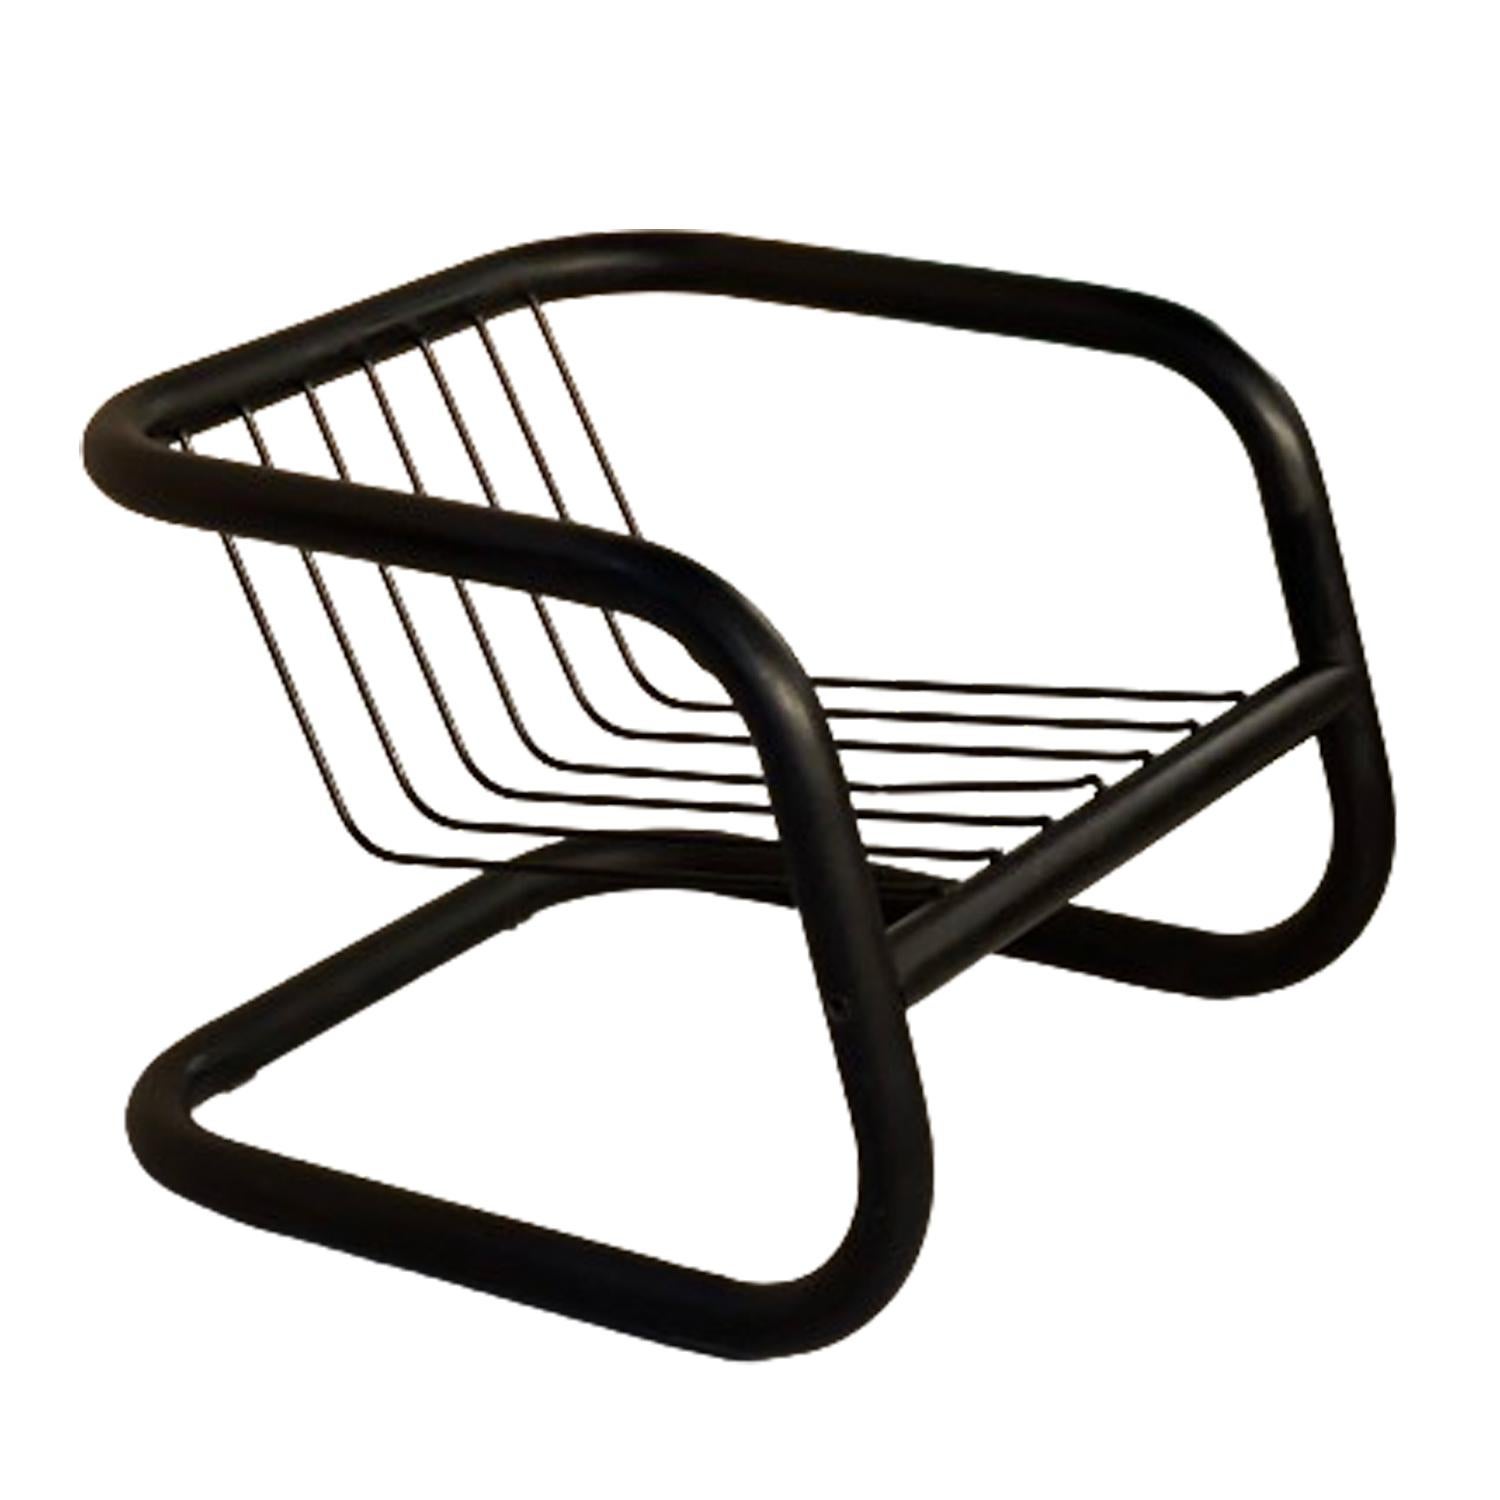 Tubular armchair designed by Geraldo de Barros for Hobjeto in the 70s.
Made from black lacquered metal.
This is the perfect piece for a collector. The cushions are original. They bear the Hobjeto label as you can see in the picture. Very rare to